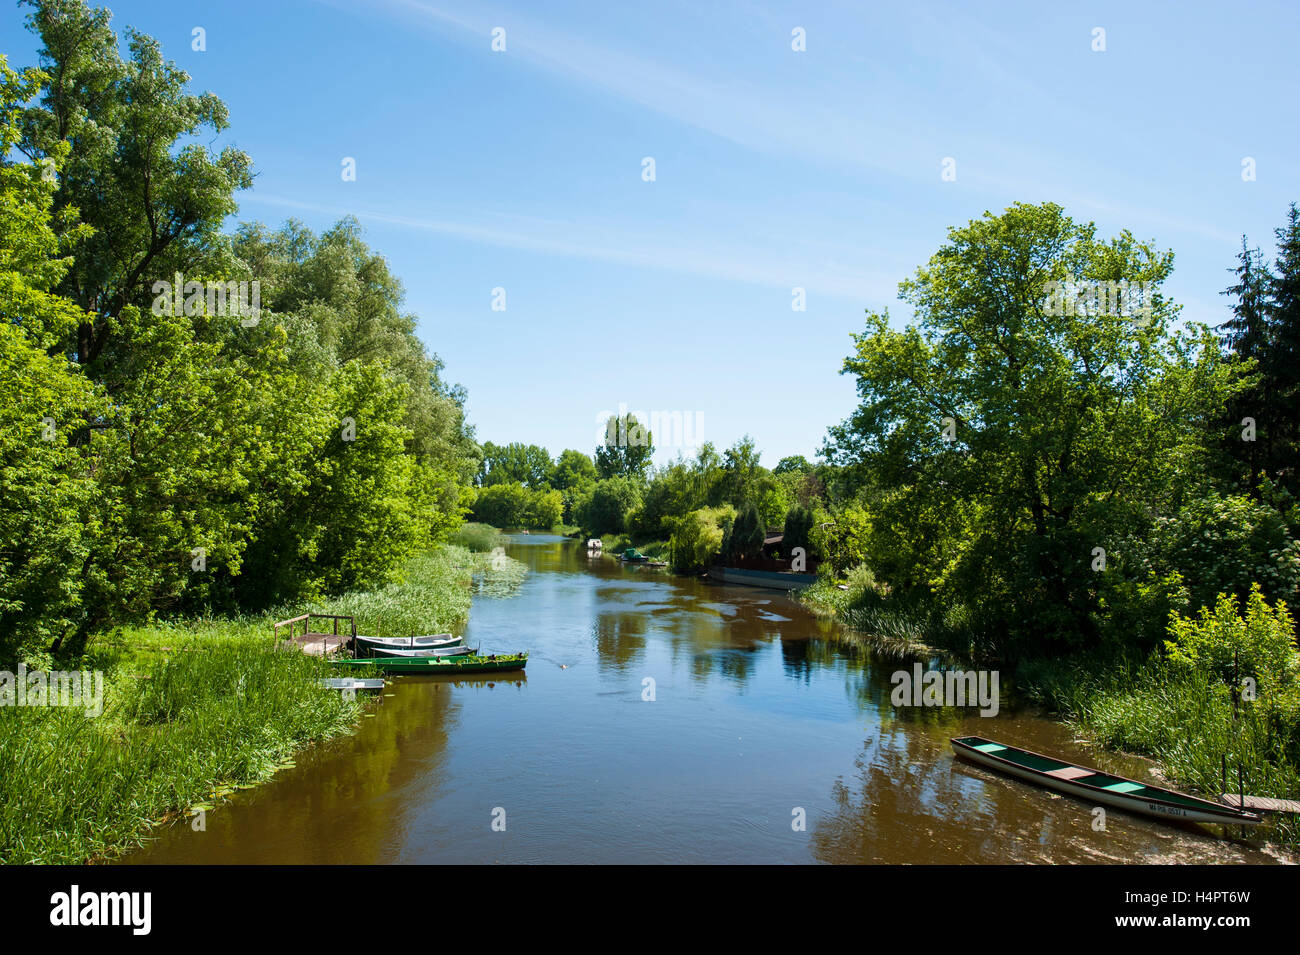 A channel of Narew river flowing through Pultusk, a historical town in Mazovia district of Poland. Stock Photo